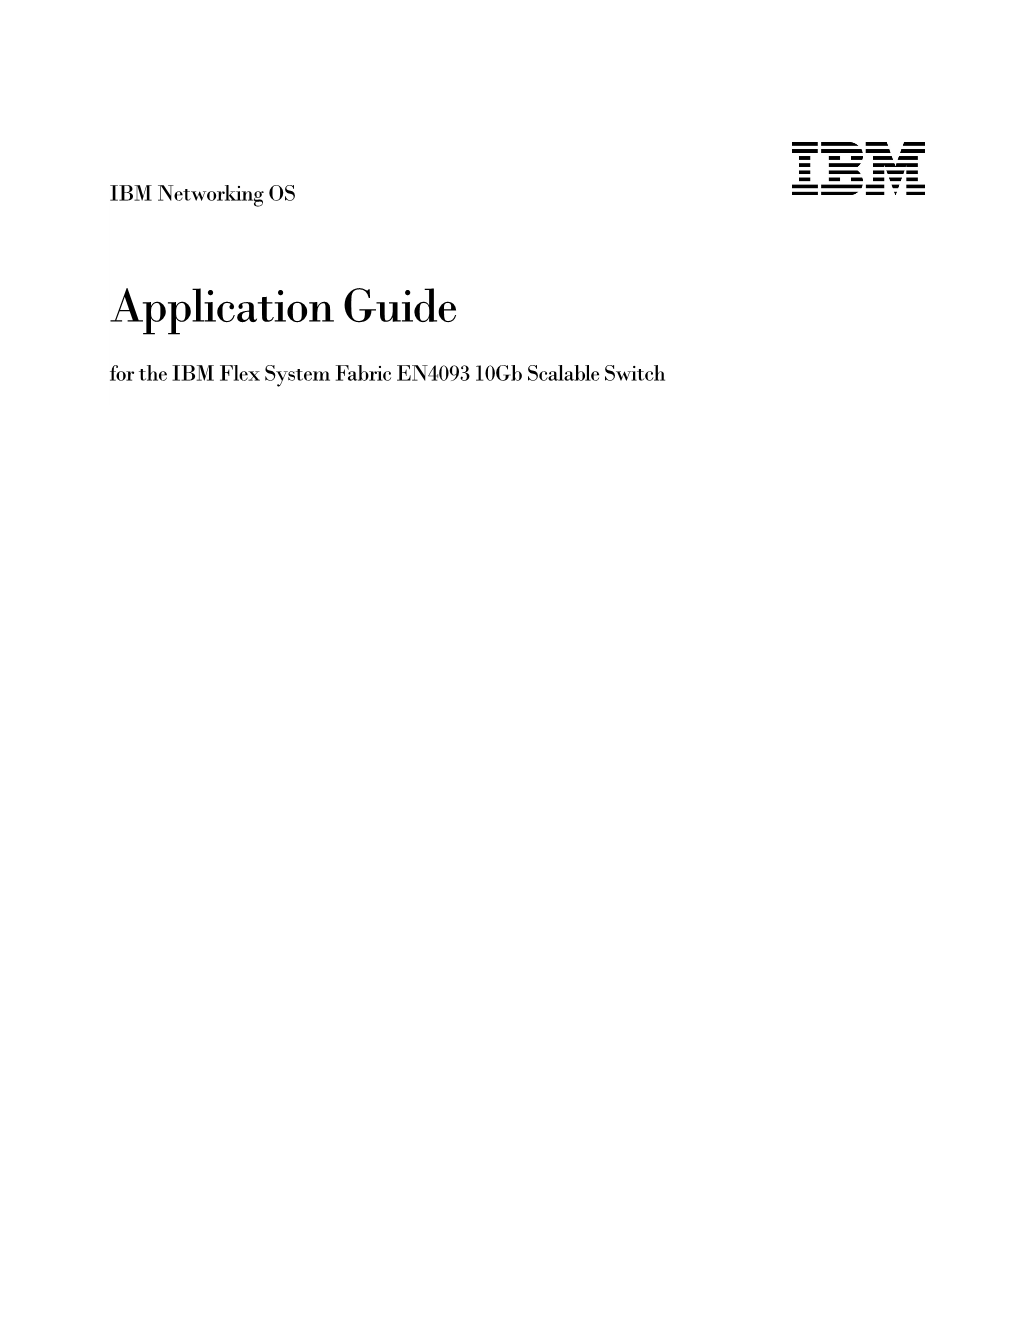 IBM Networking OS Application Guide for the IBM Flex System Fabric EN4093 10Gb Scalable Switch